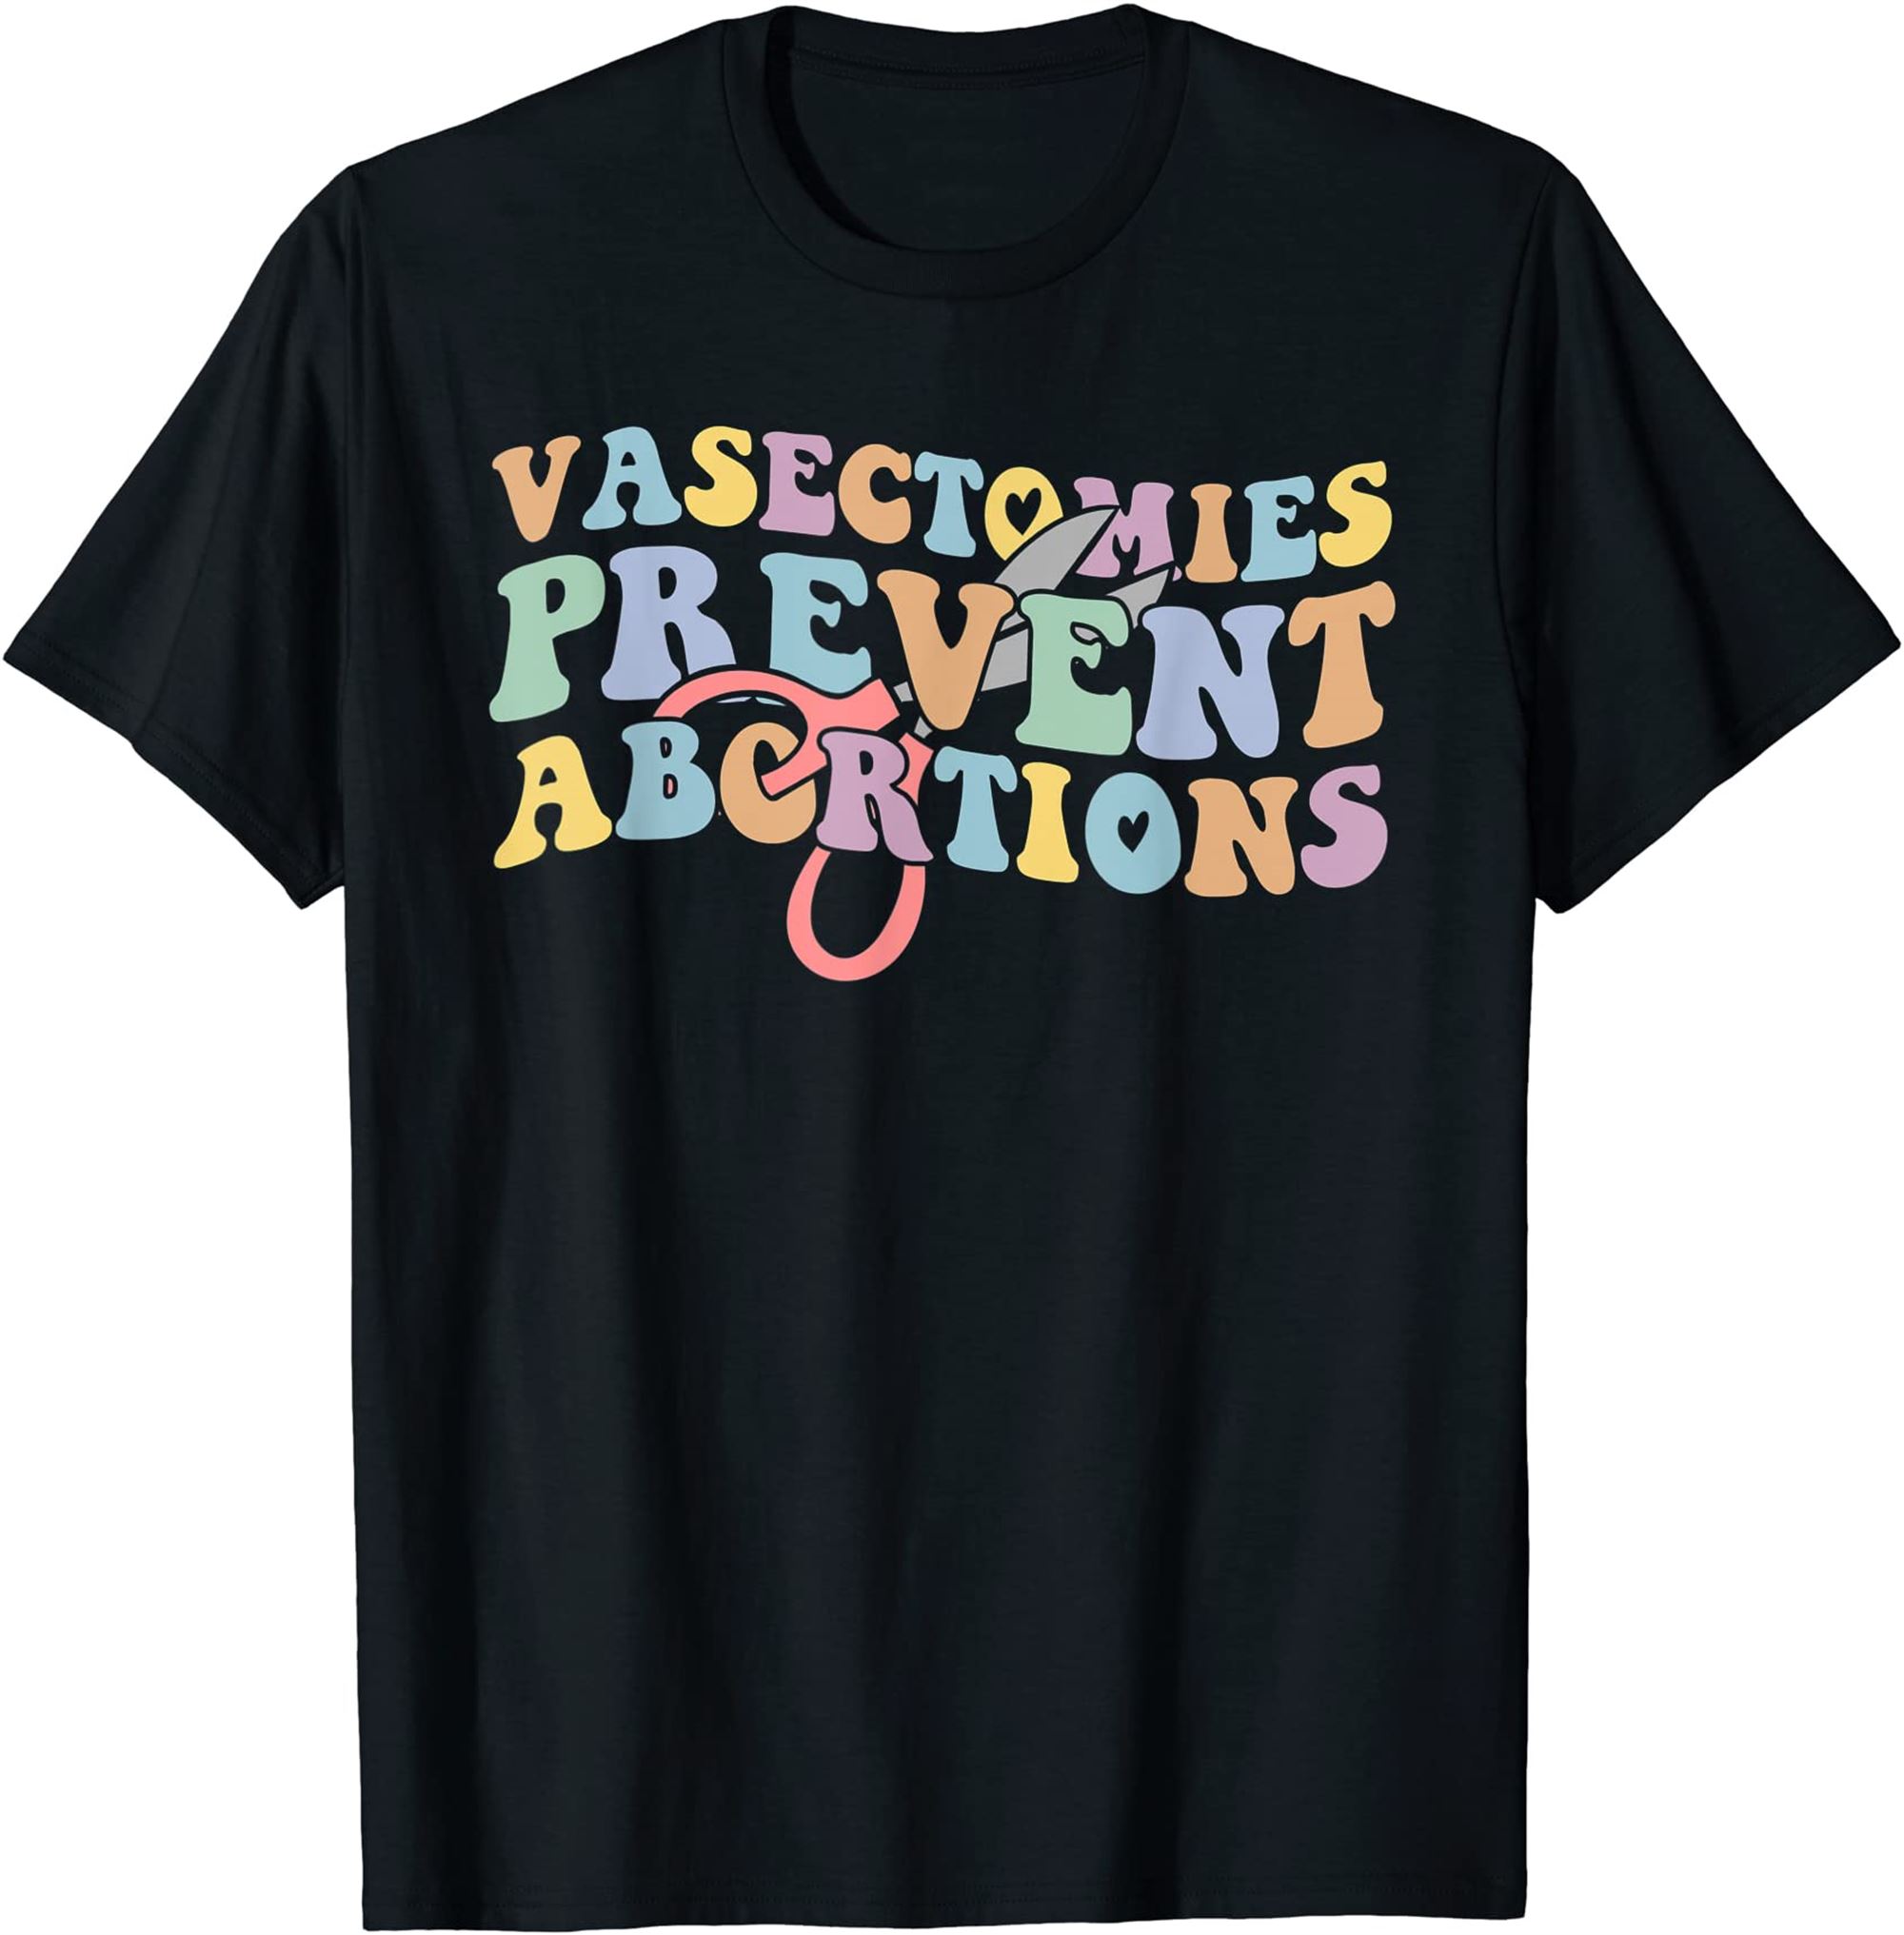 Vasectomies Prevent Abortions Womens Pro Choice Feminist T-shirt Size Up To 5xl